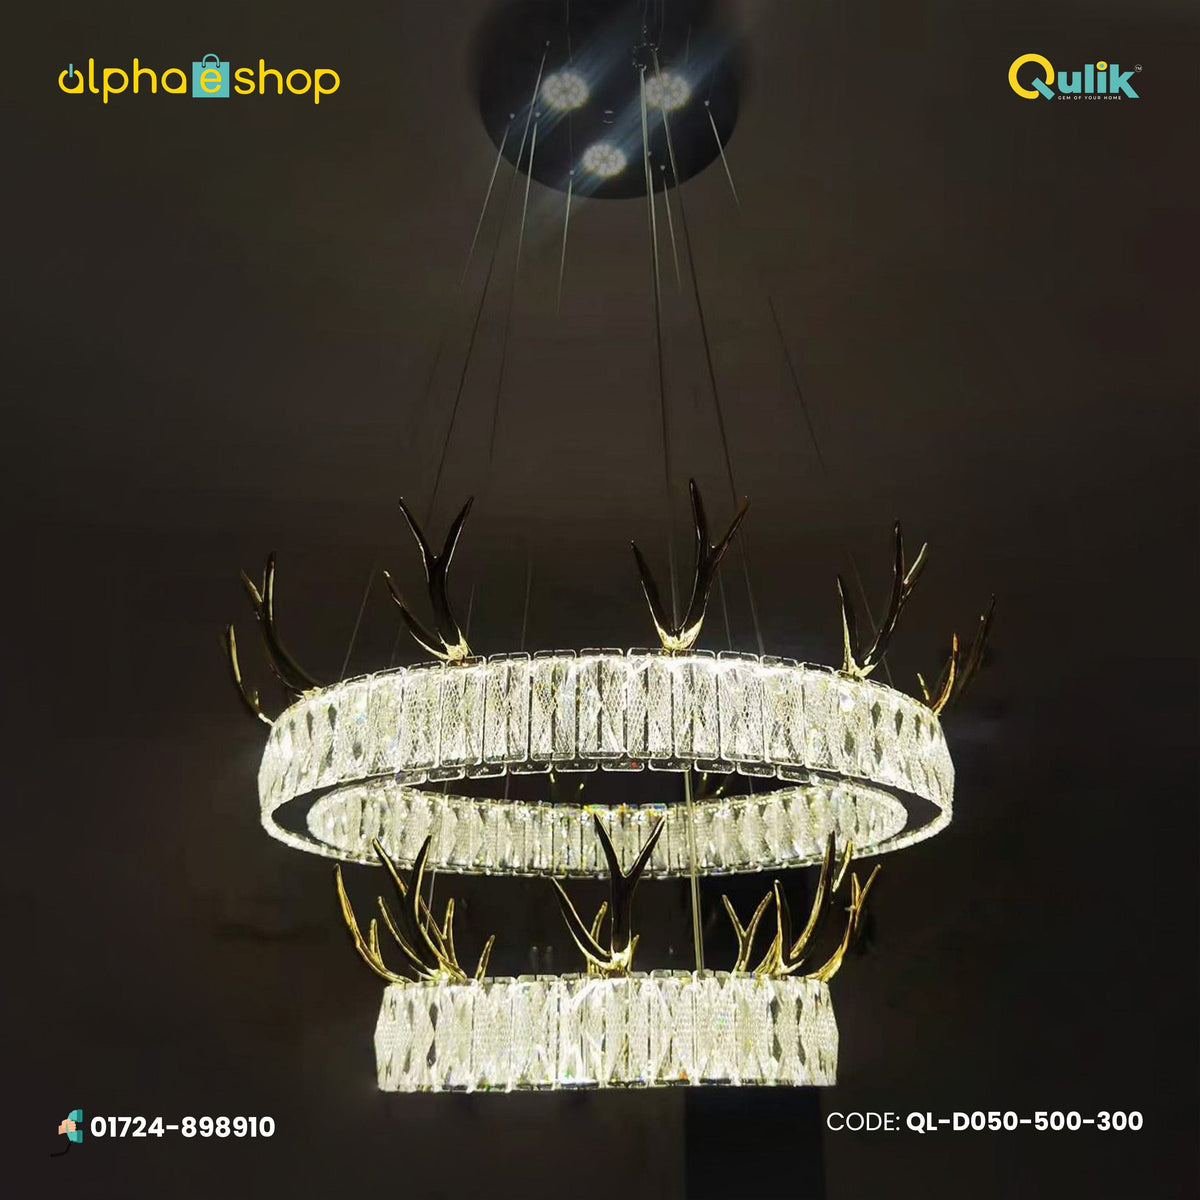 Qulik D050-500-300 LED Ceiling Light - Dual Ring Design, 60W Power, Adjustable Color Temperature. Ideal for living rooms, bedrooms, and dining areas.